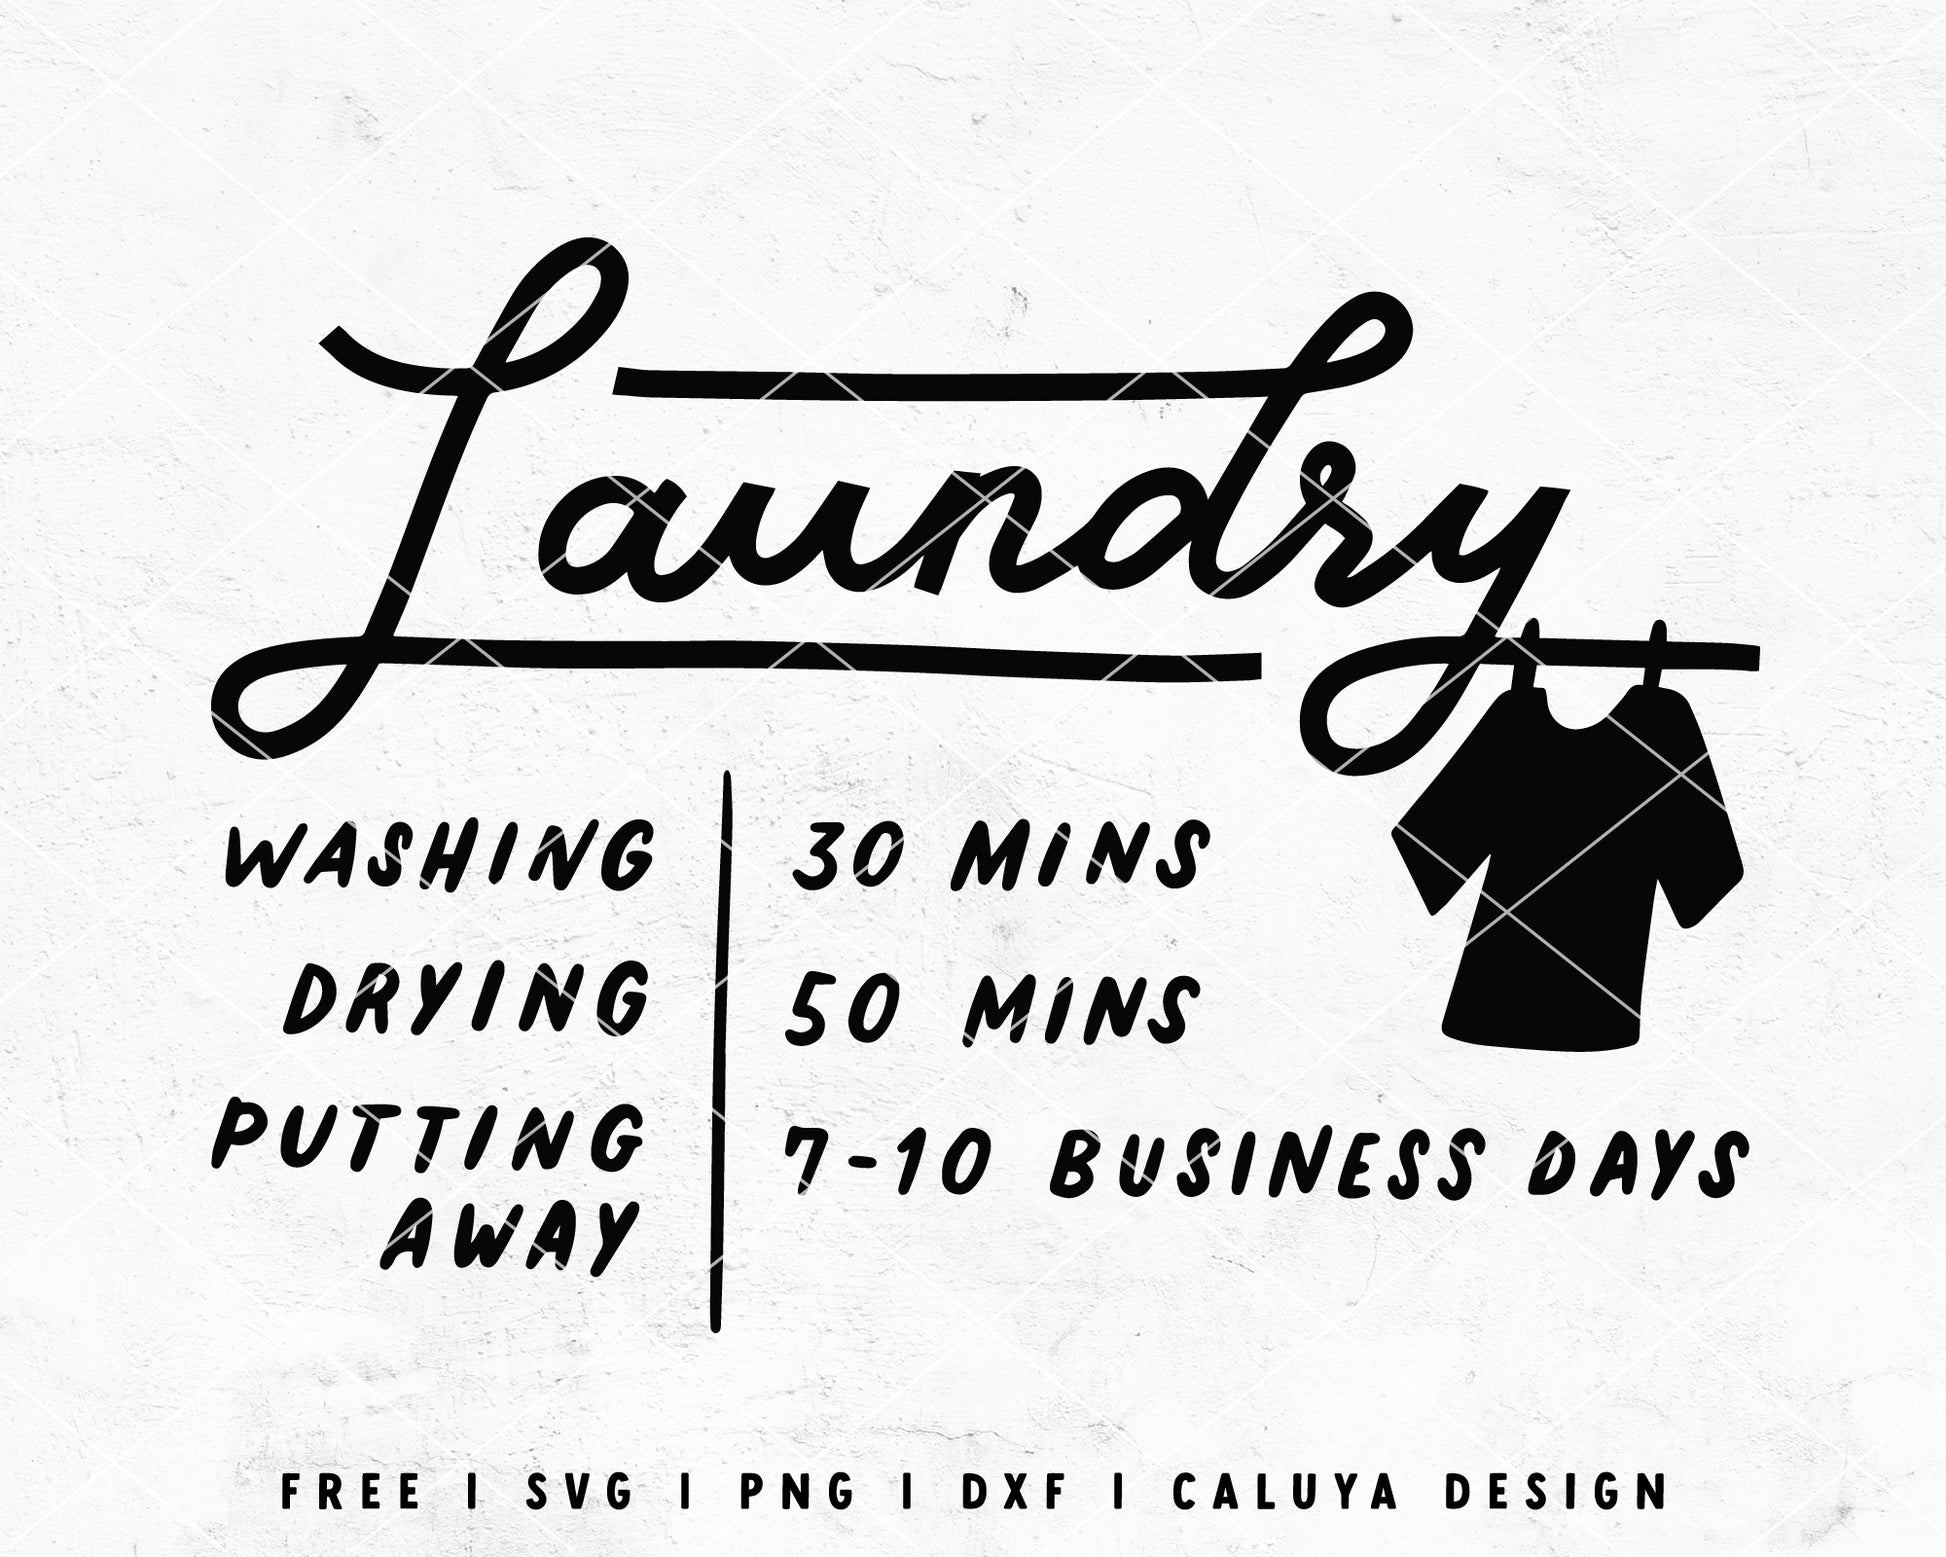 Save Up Your Quarters For The Laundry This Design Is Sure To Generate A  Chuckle From Anyone Managing This Domestic Chore. Royalty Free SVG,  Cliparts, Vectors, and Stock Illustration. Image 41569169.